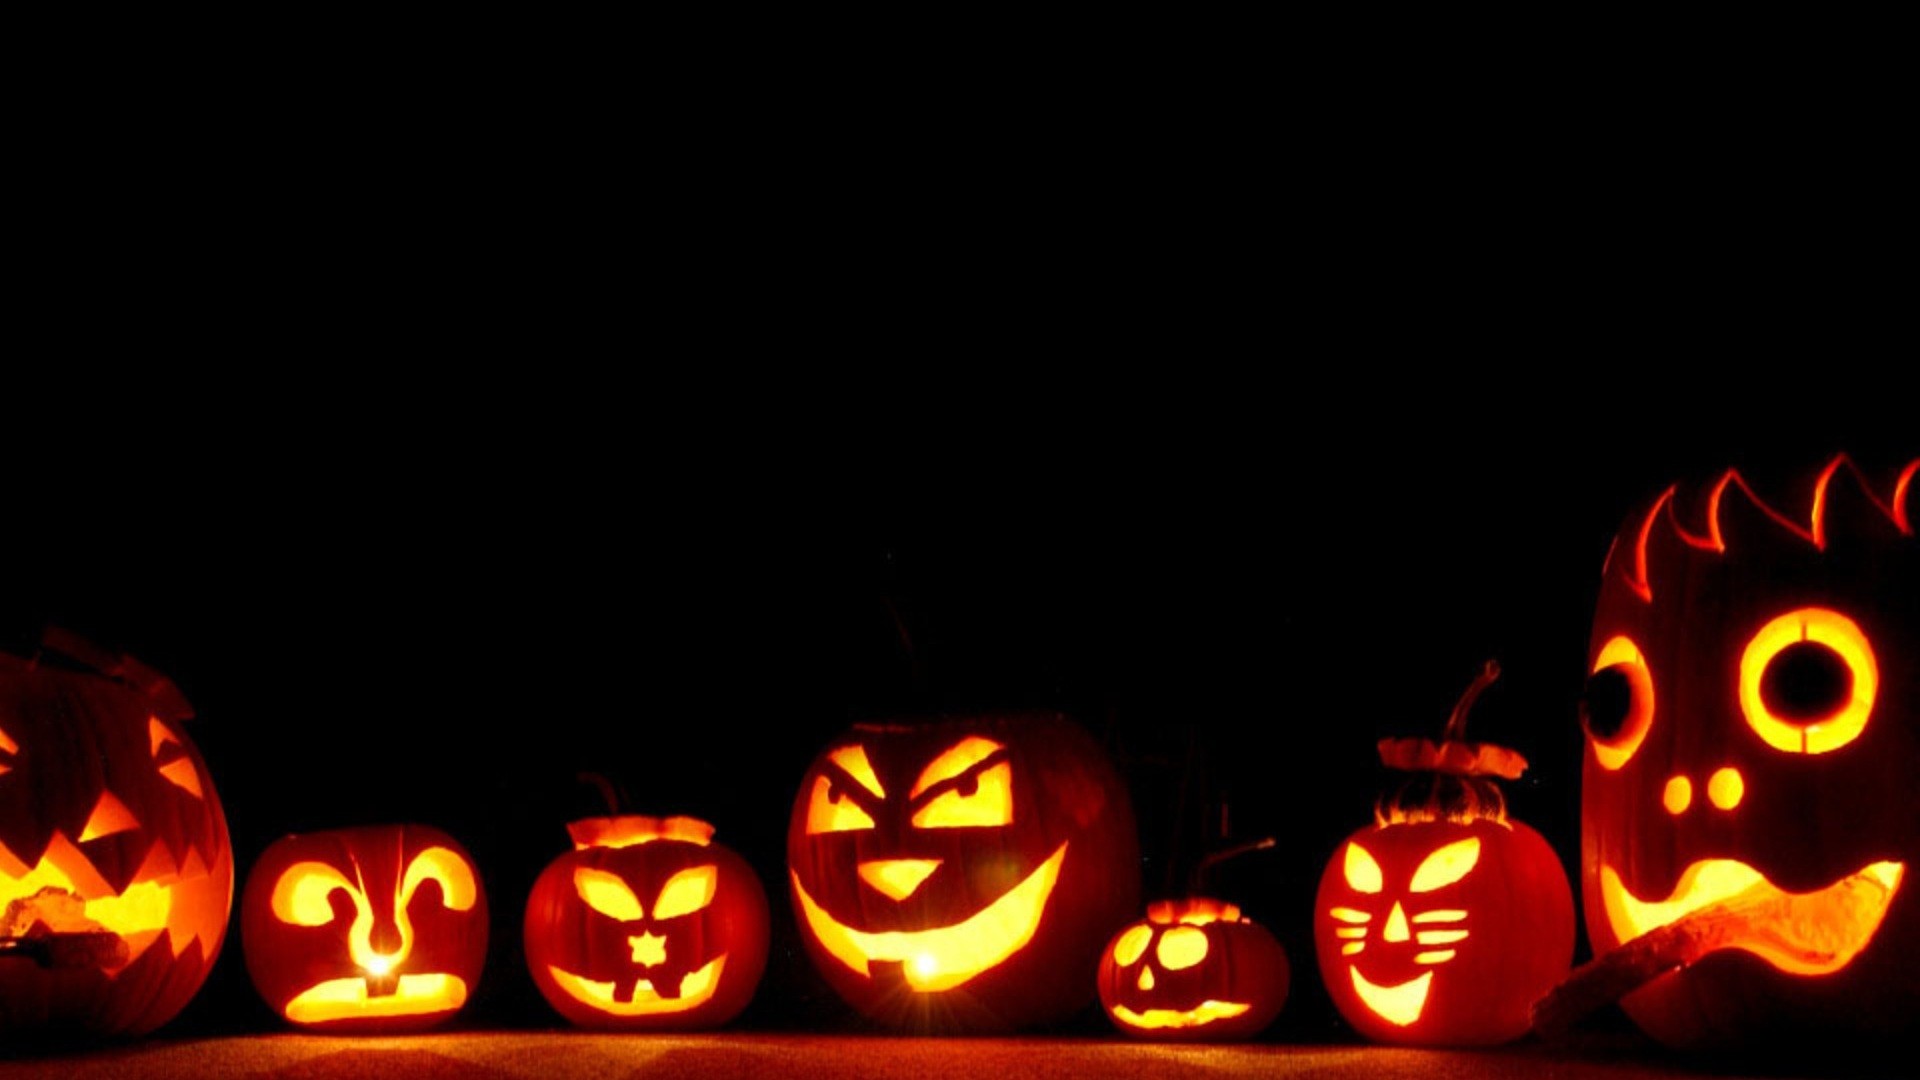 1920x1080 background hd halloween theme ; Beautiful-Halloween-Wallpapers-and-Themes